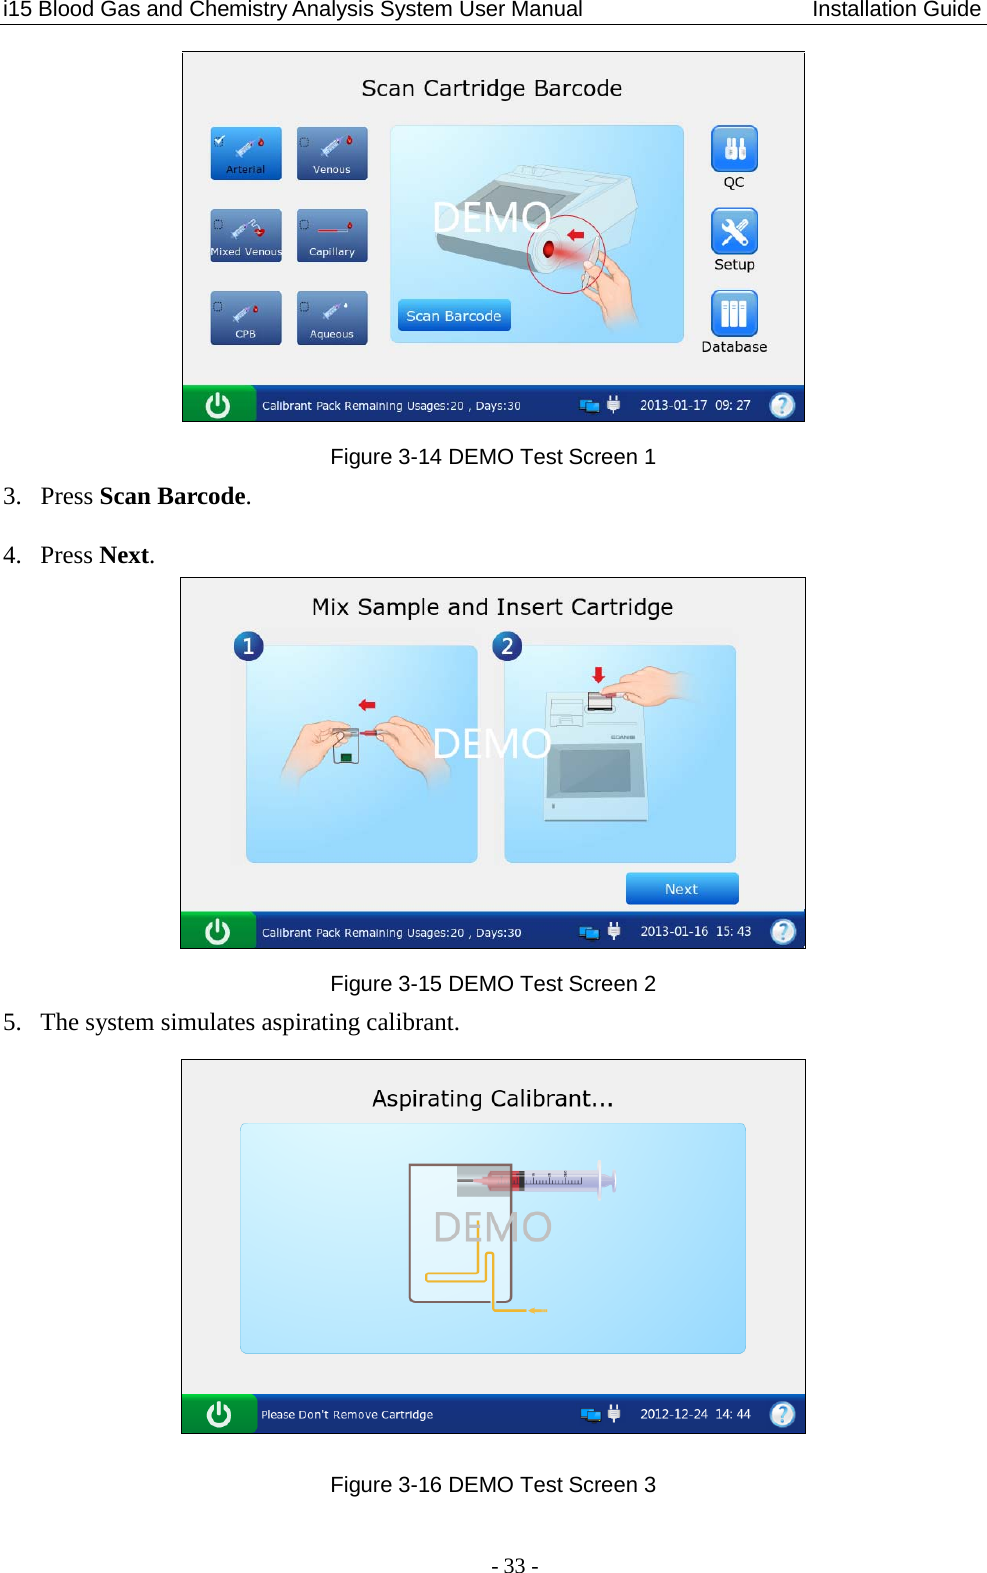 i15 Blood Gas and Chemistry Analysis System User Manual                     Installation Guide - 33 -  Figure 3-14 DEMO Test Screen 1 3. Press Scan Barcode. 4. Press Next.  Figure 3-15 DEMO Test Screen 2 5. The system simulates aspirating calibrant.  Figure 3-16 DEMO Test Screen 3 